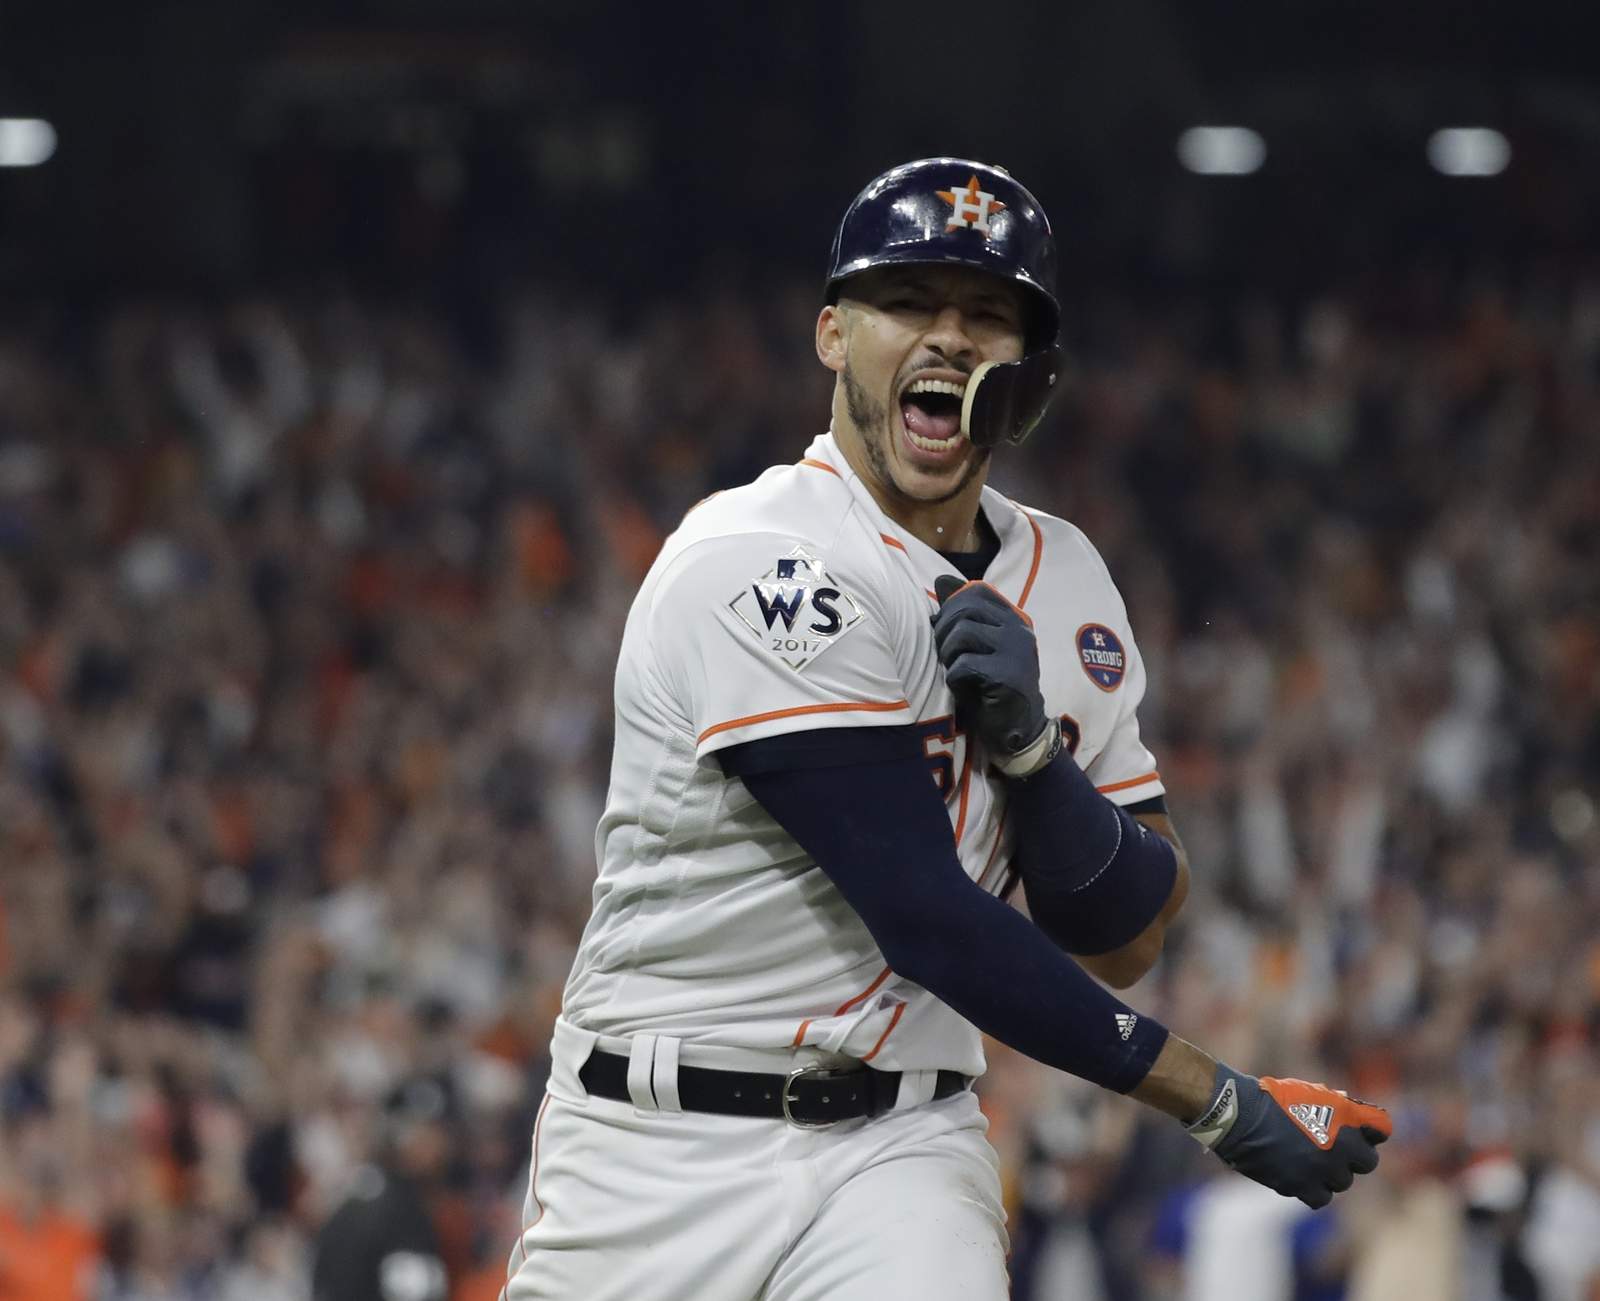 Astros’ Correa launches fundraising campaign to help families in need amid winter storms